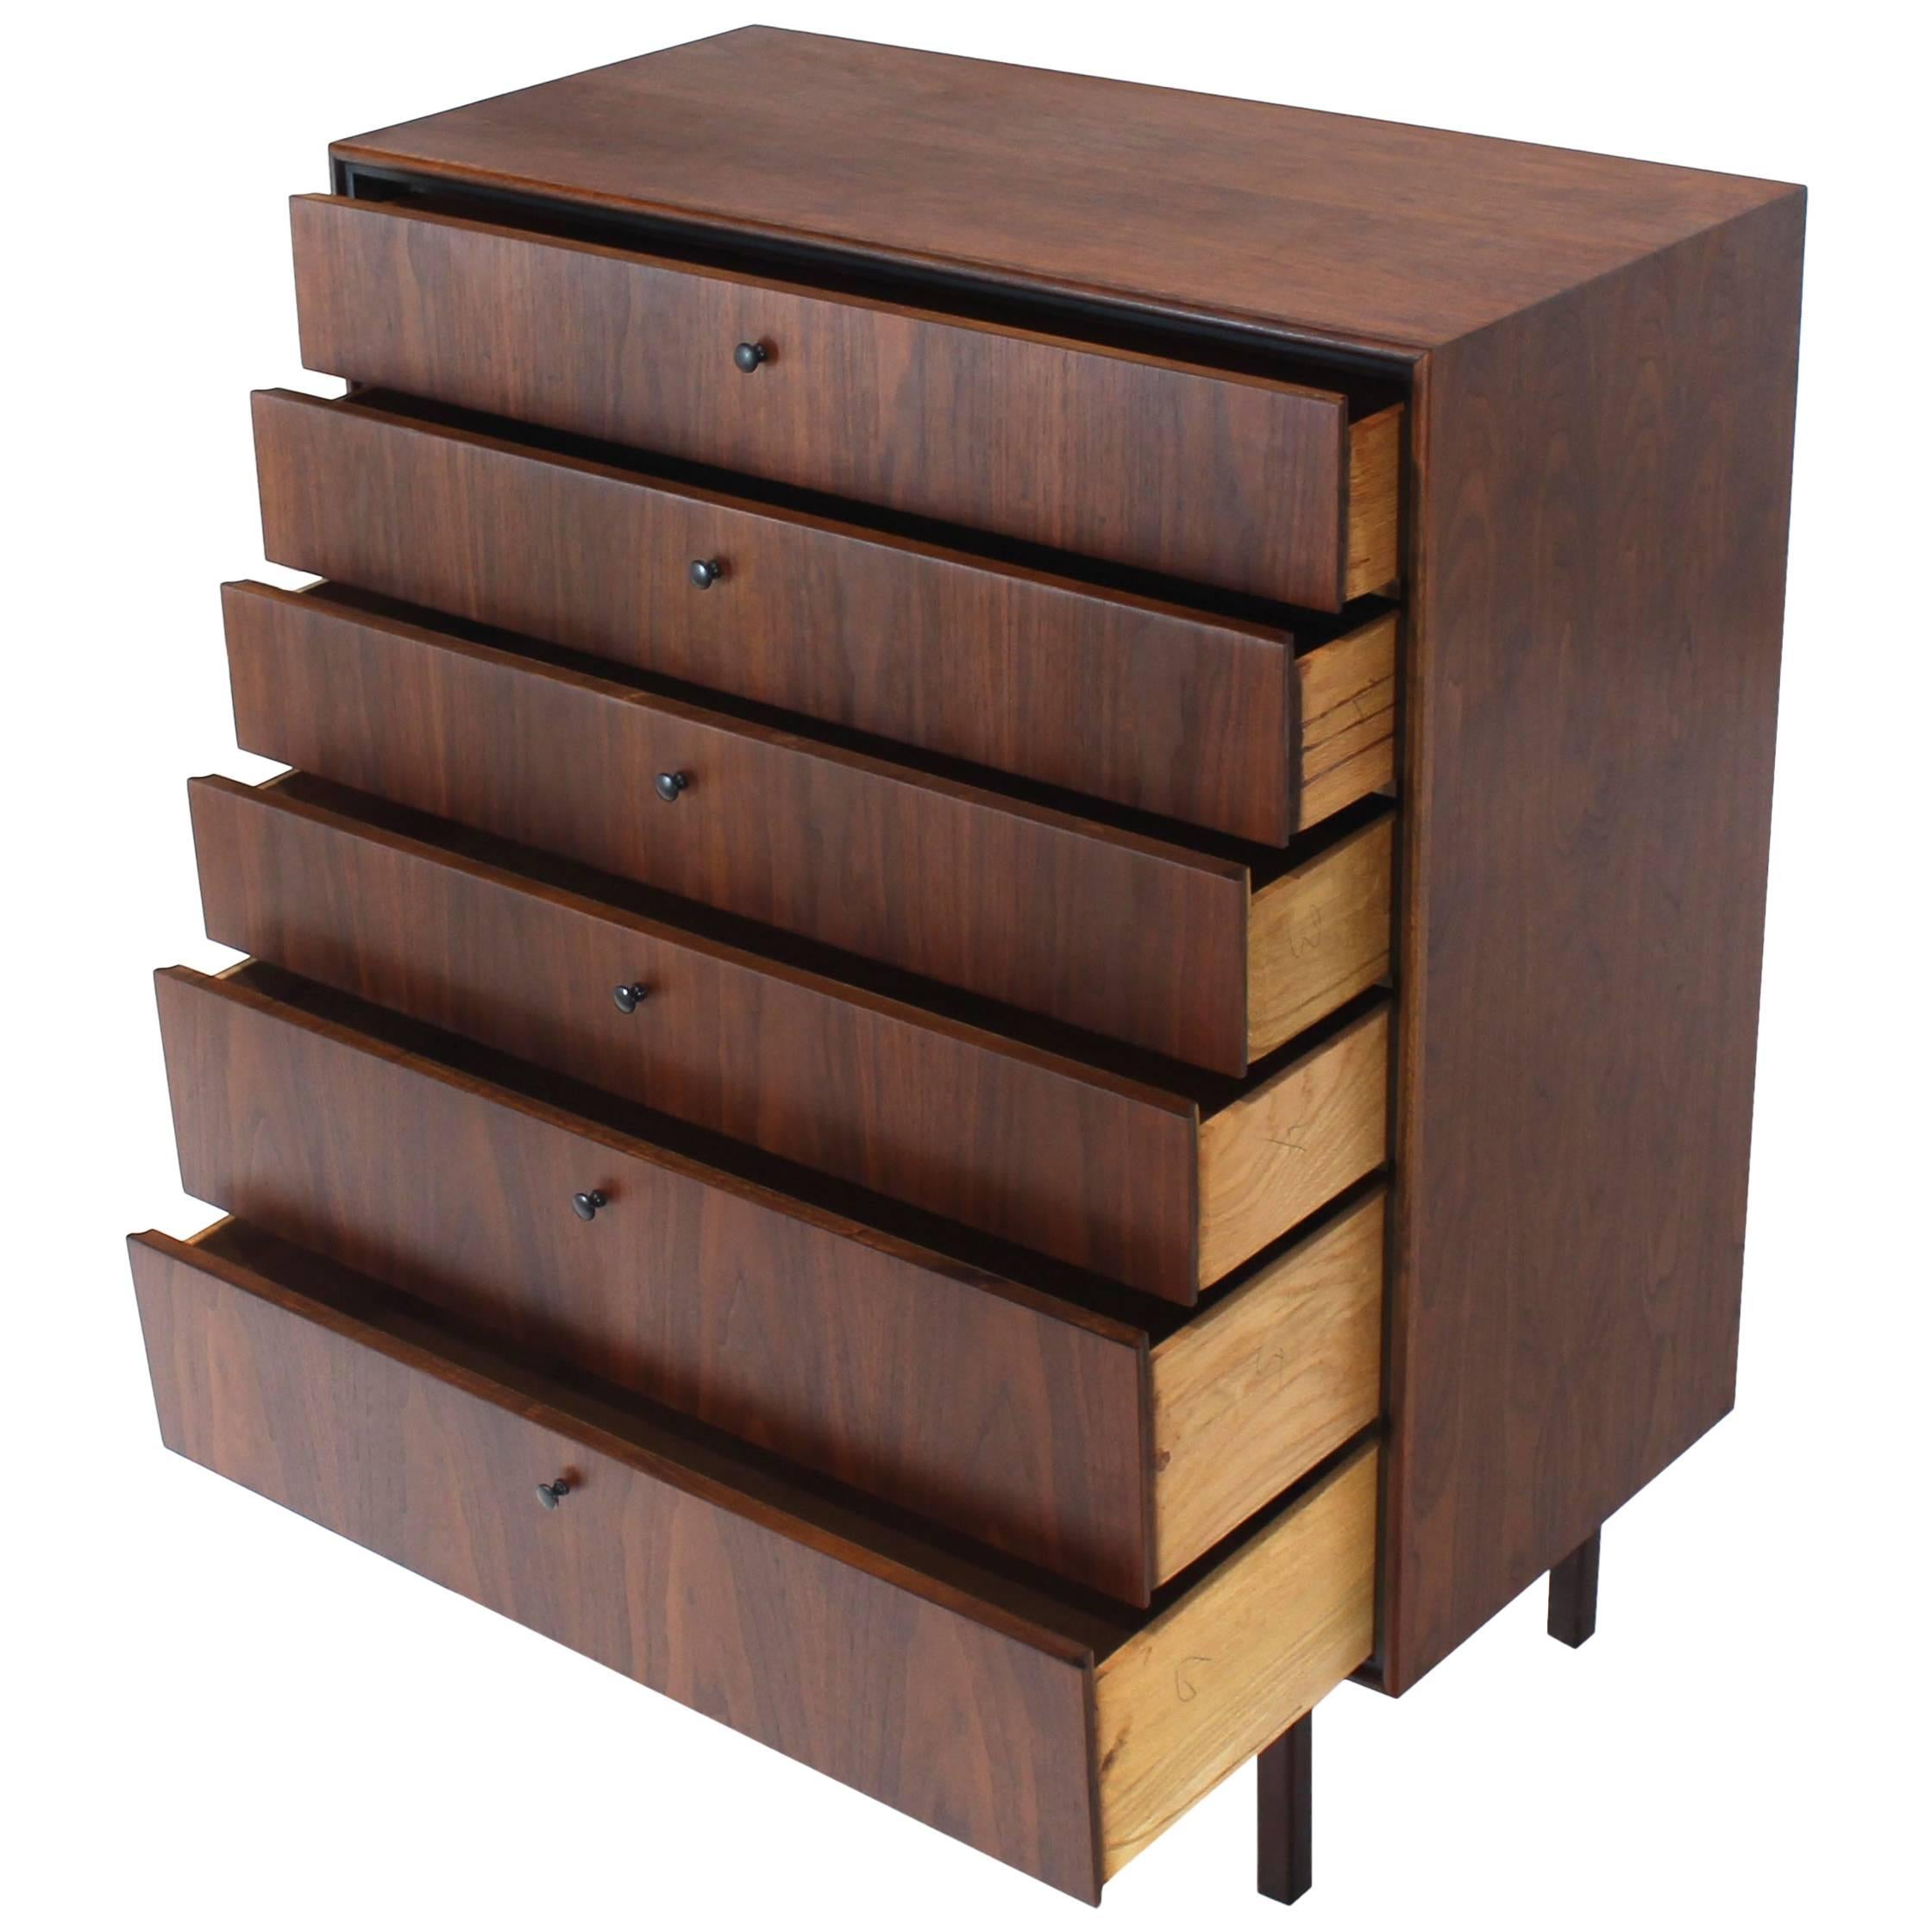 Bookmached Wood Grain Oiled Walnut 6 Drawers Tall High Chest Dresser 